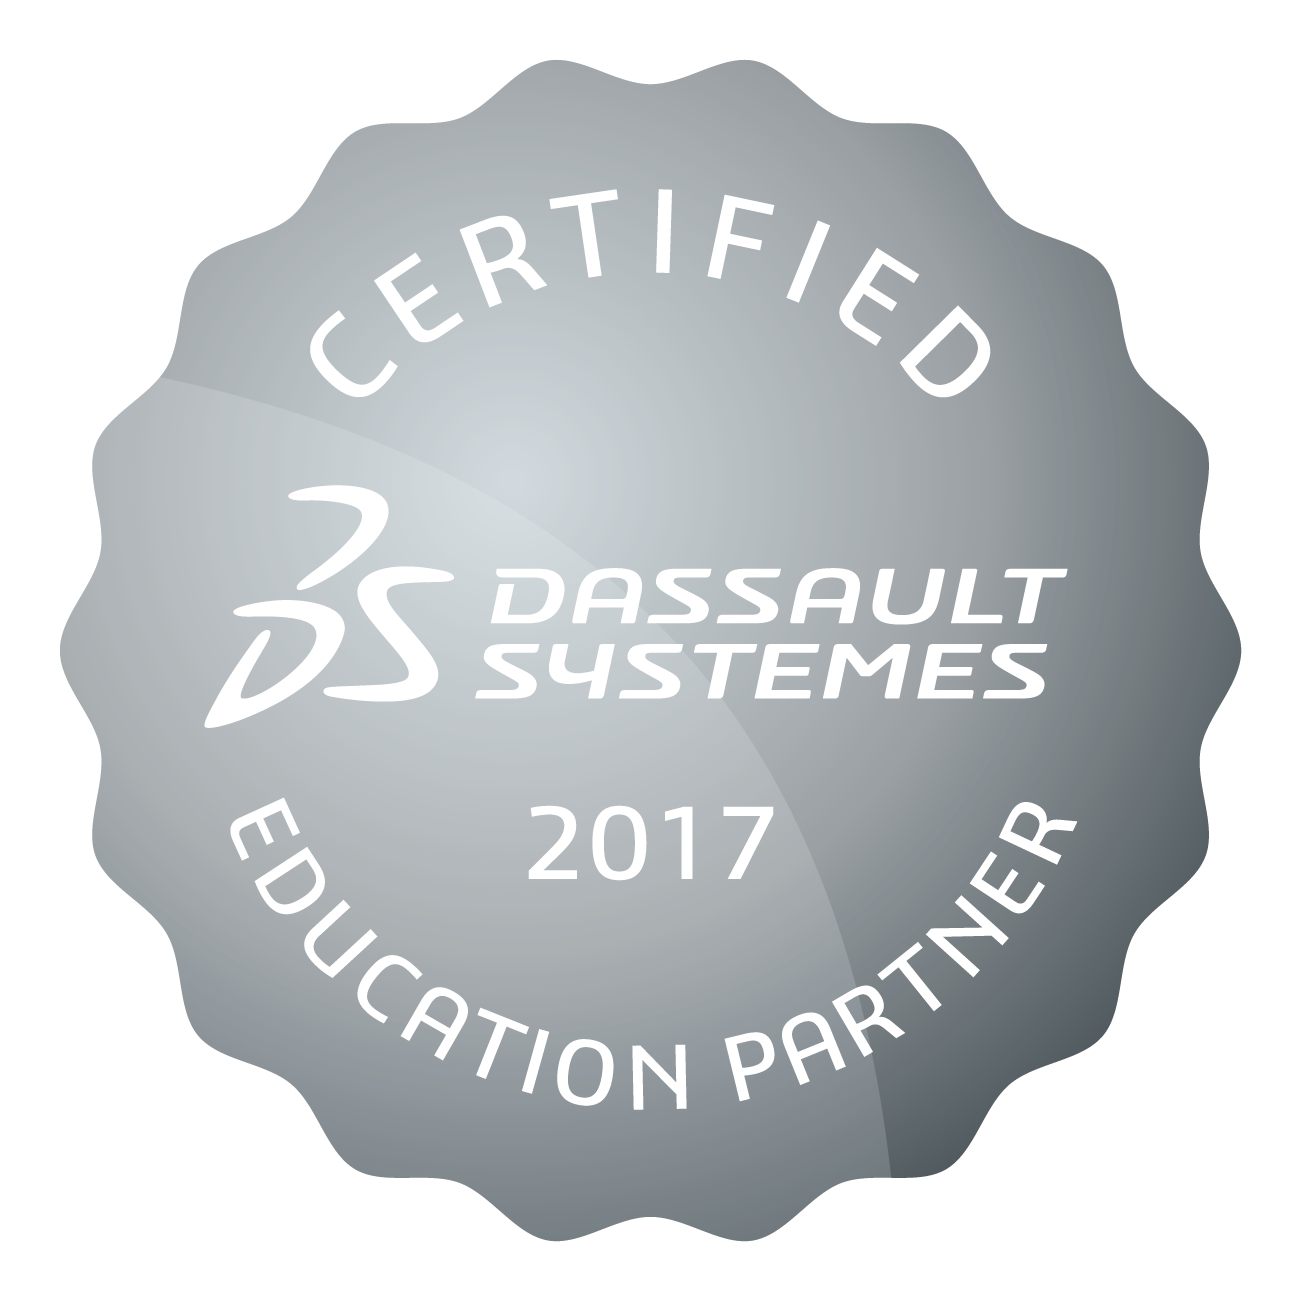 DASSAULT SYSTEMES EDUCATION PARTNER Certified